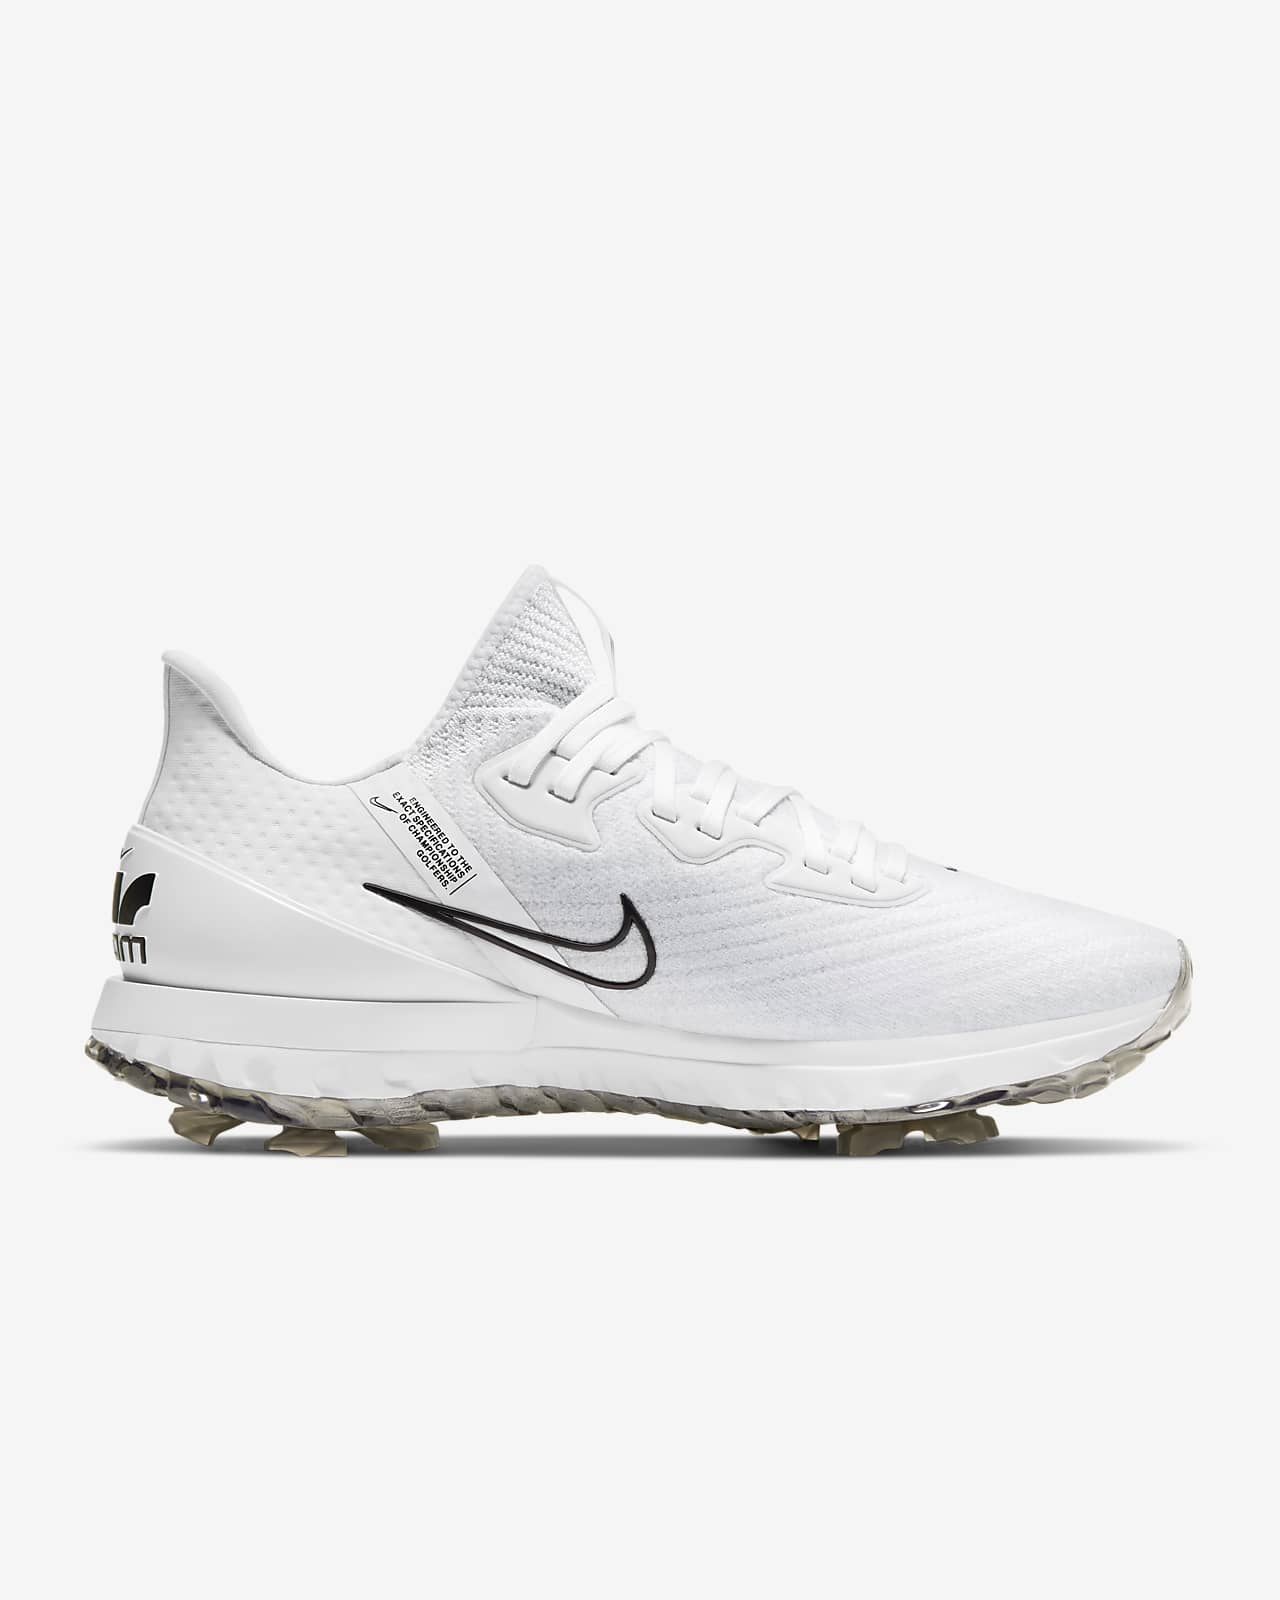 nike air zoom infinity tour golf shoes men's reviews